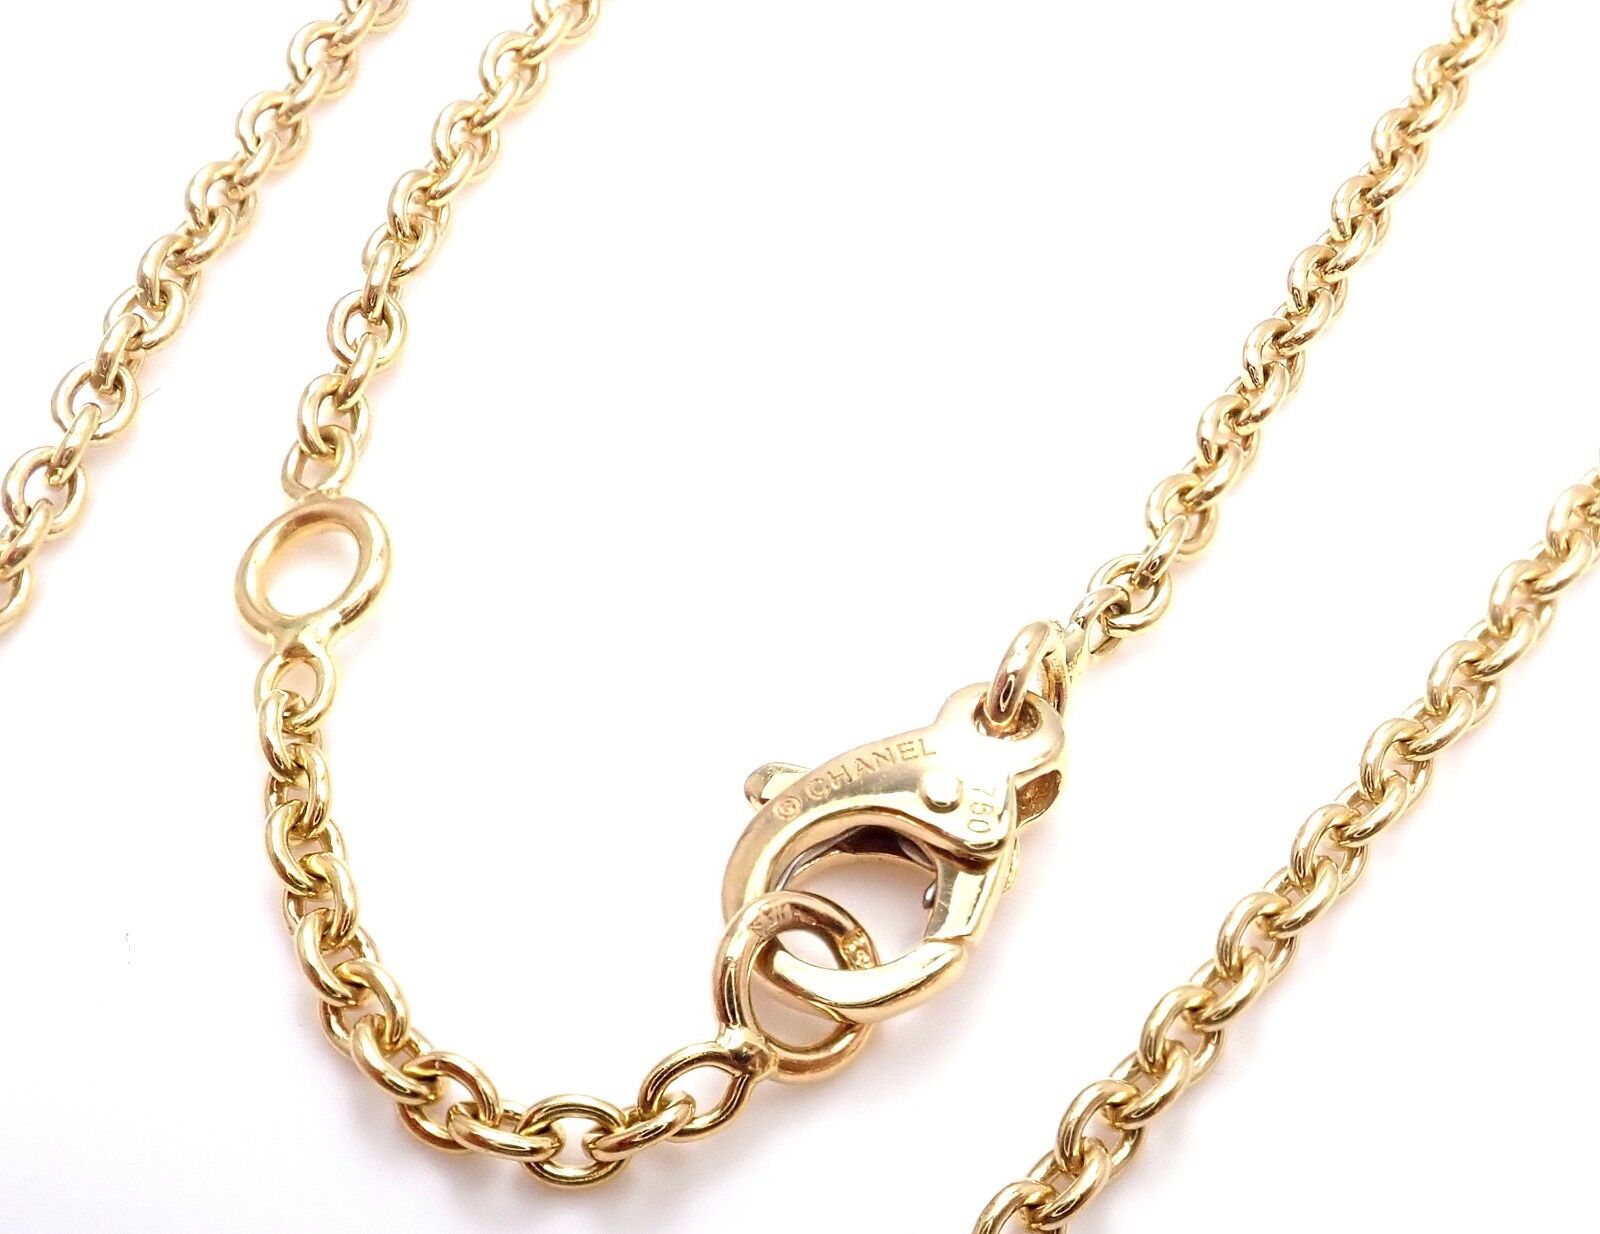 Authentic Chanel 18K Yellow Gold Classic Round Chain Necklace